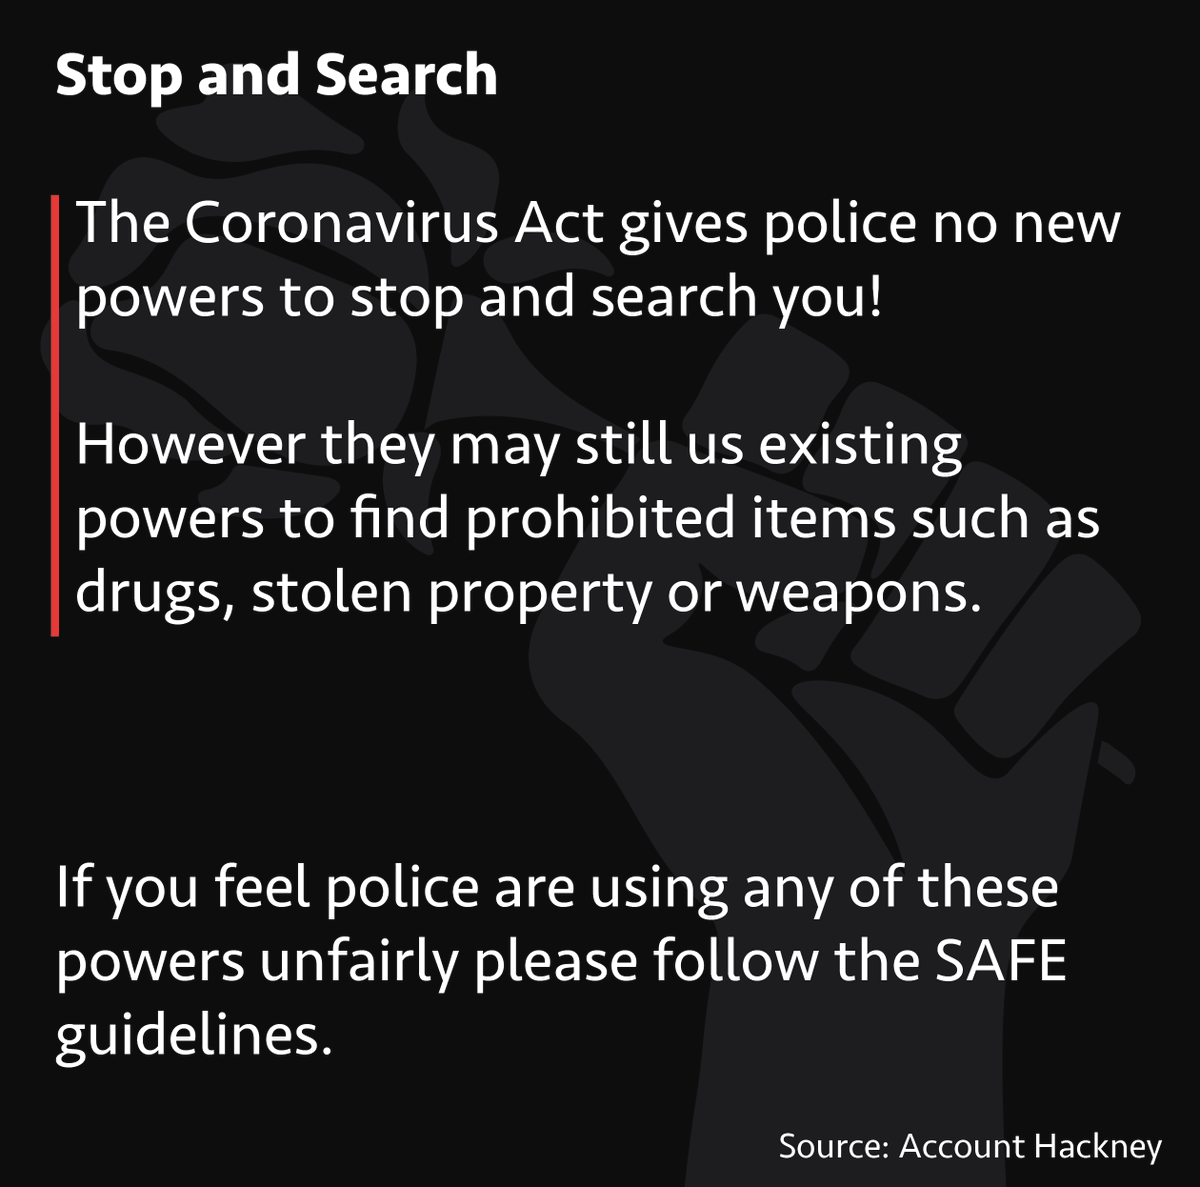 What other powers can the Police use?Vehicle stops under the Road Traffic Act 1988, property searches under the Coronavirus Act 2020 & Stop and Search